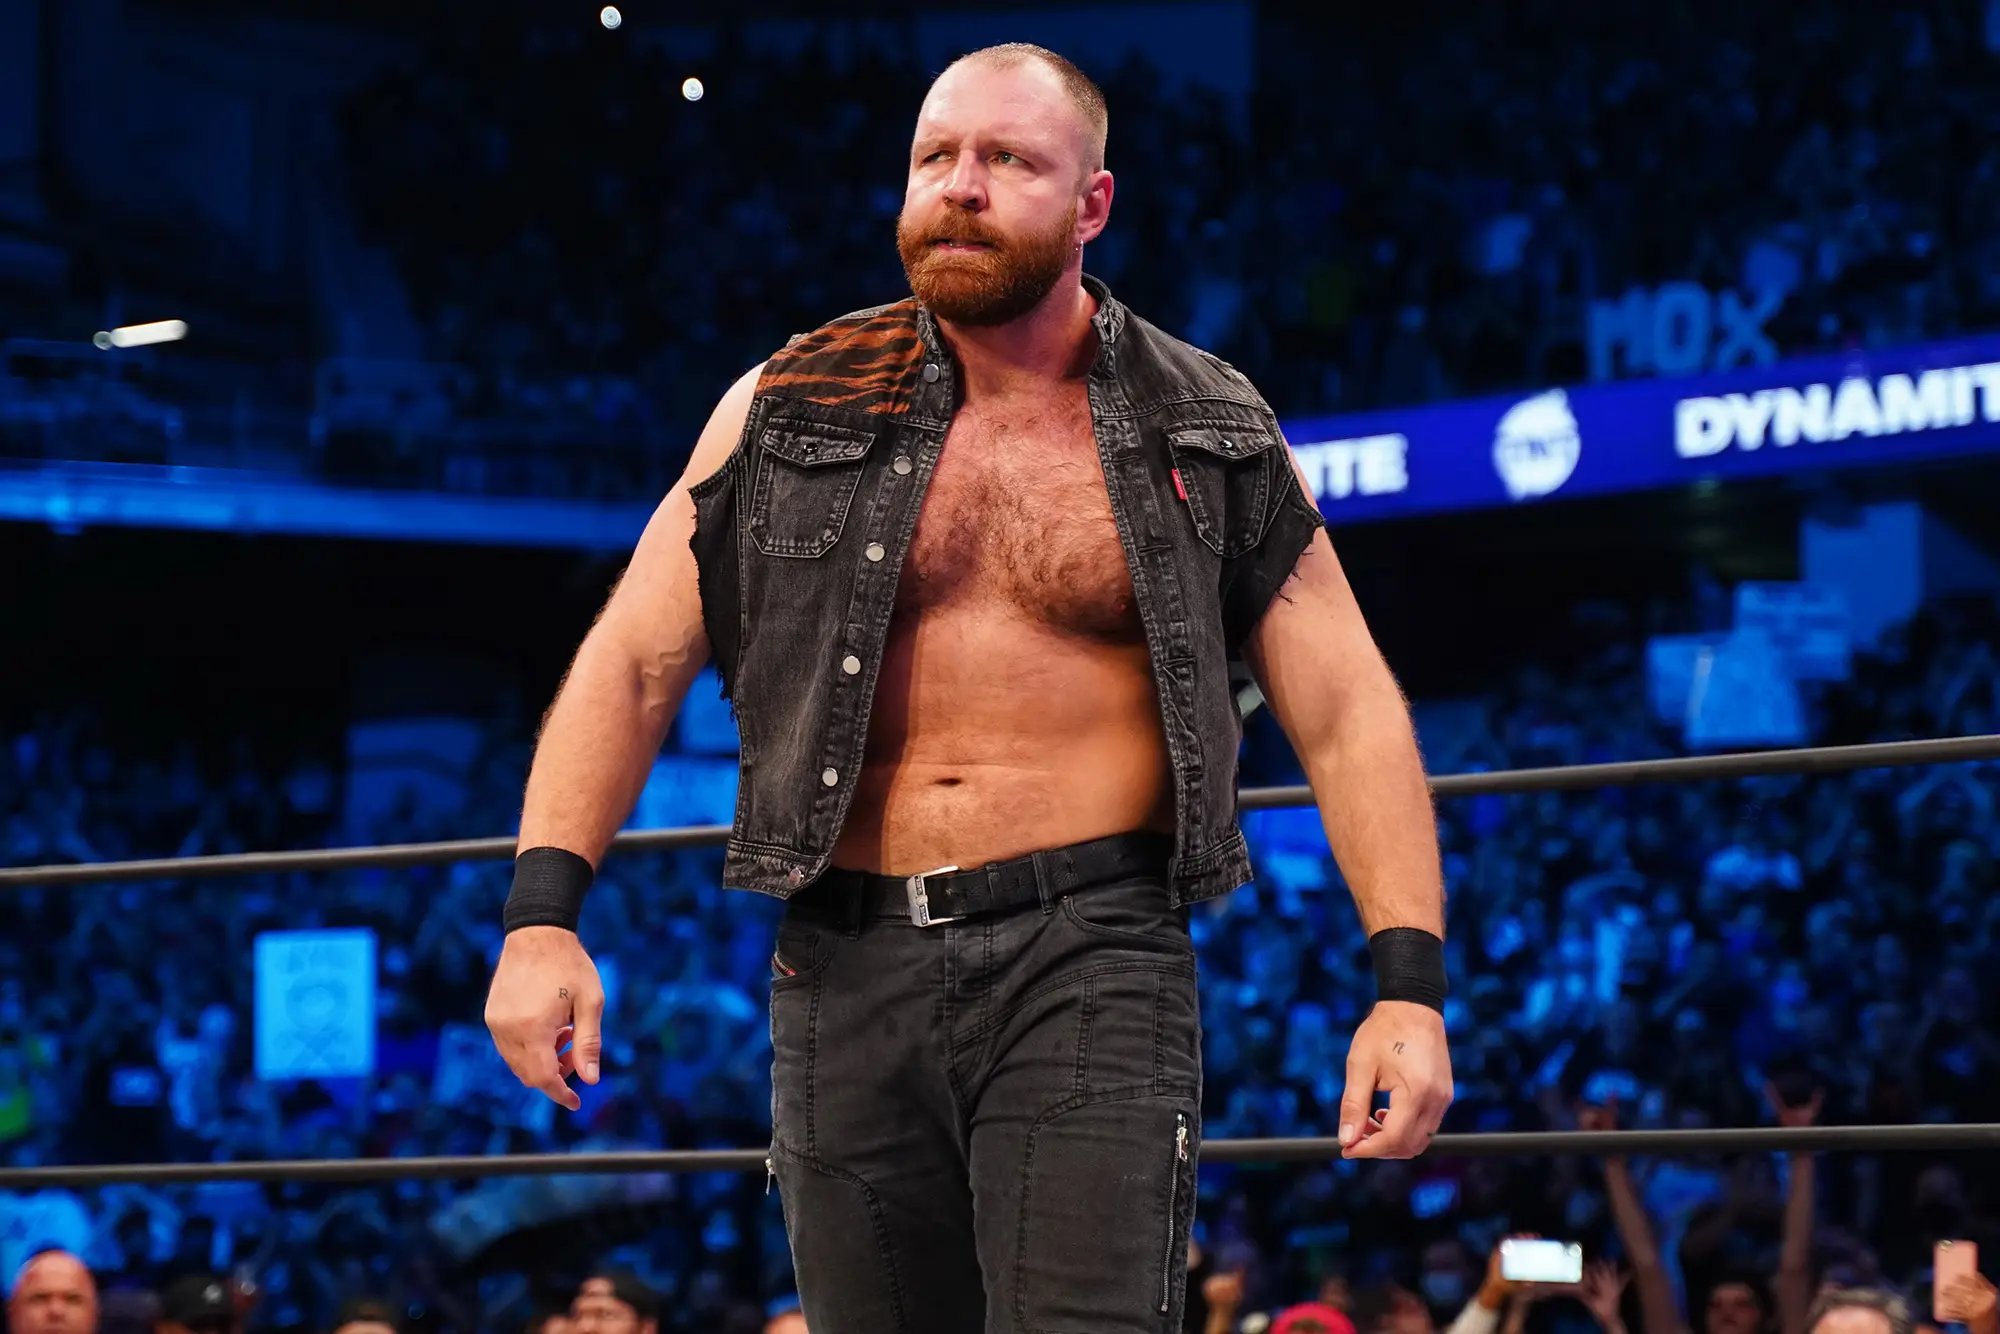 Jon Moxley’s Injury Forces AEW WrestleDream Plans to be Altered